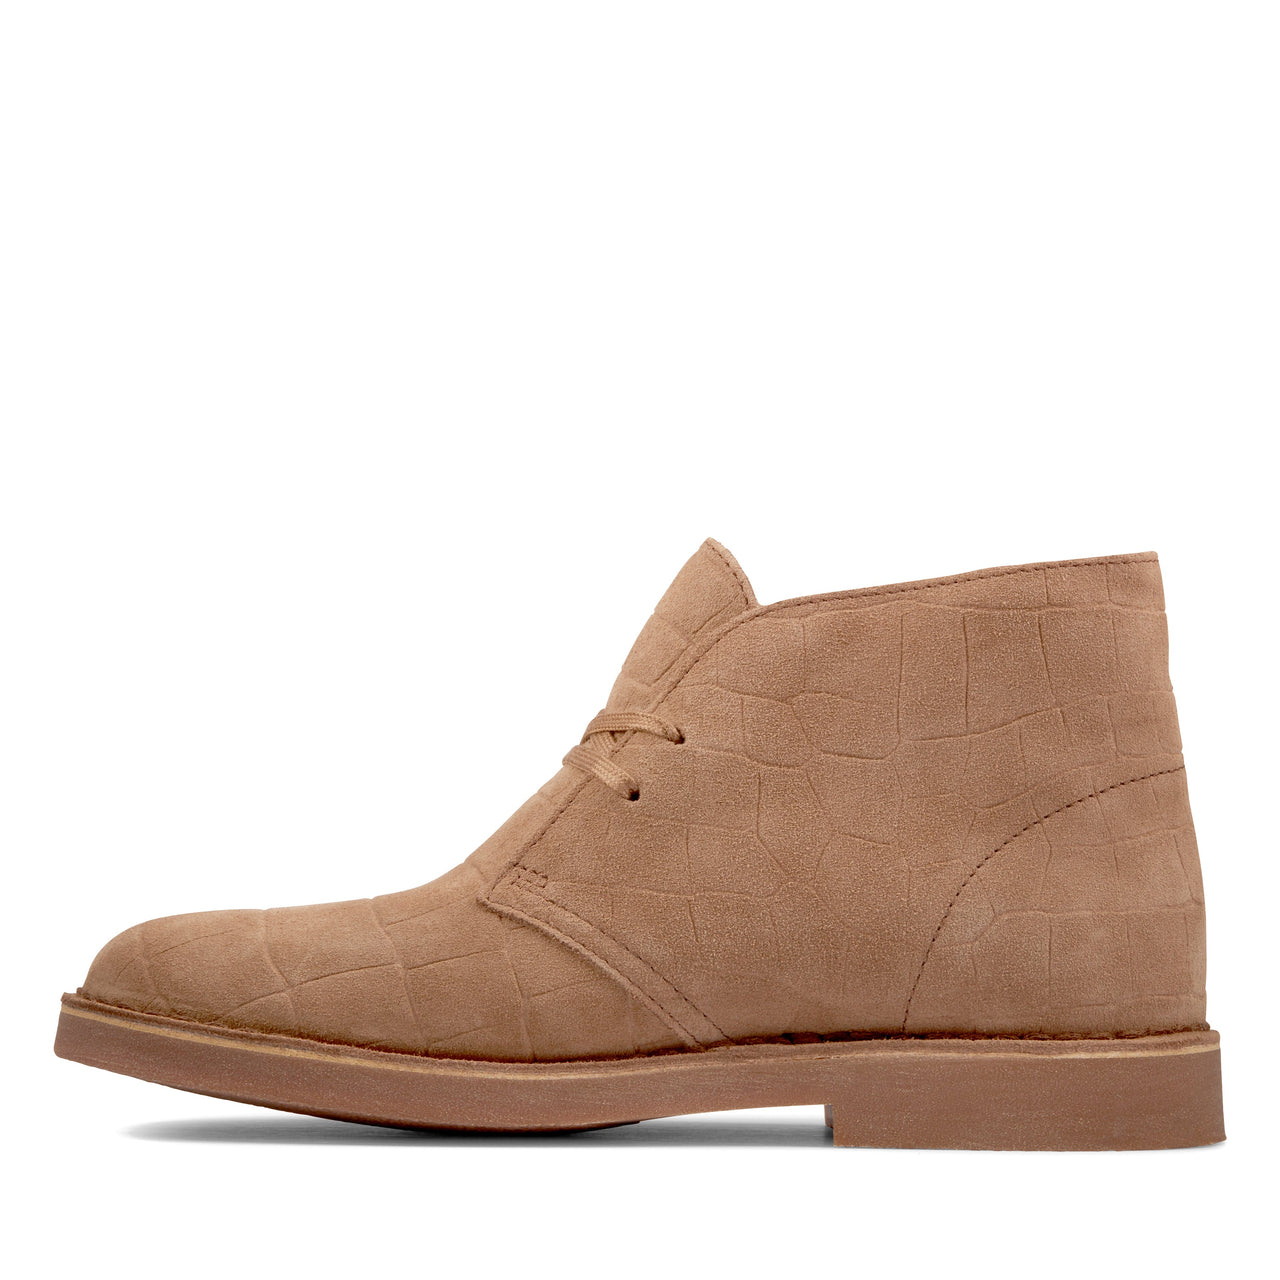  Clarks Womens Desert Boot 2 with durable rubber outsole and contrast stitching